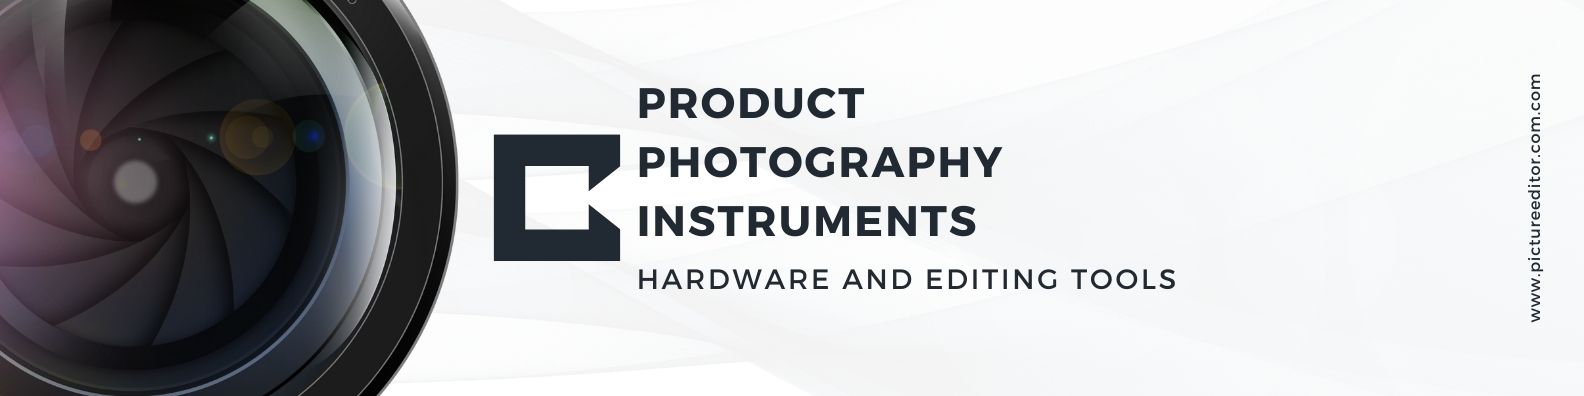 Product Photography Instruments